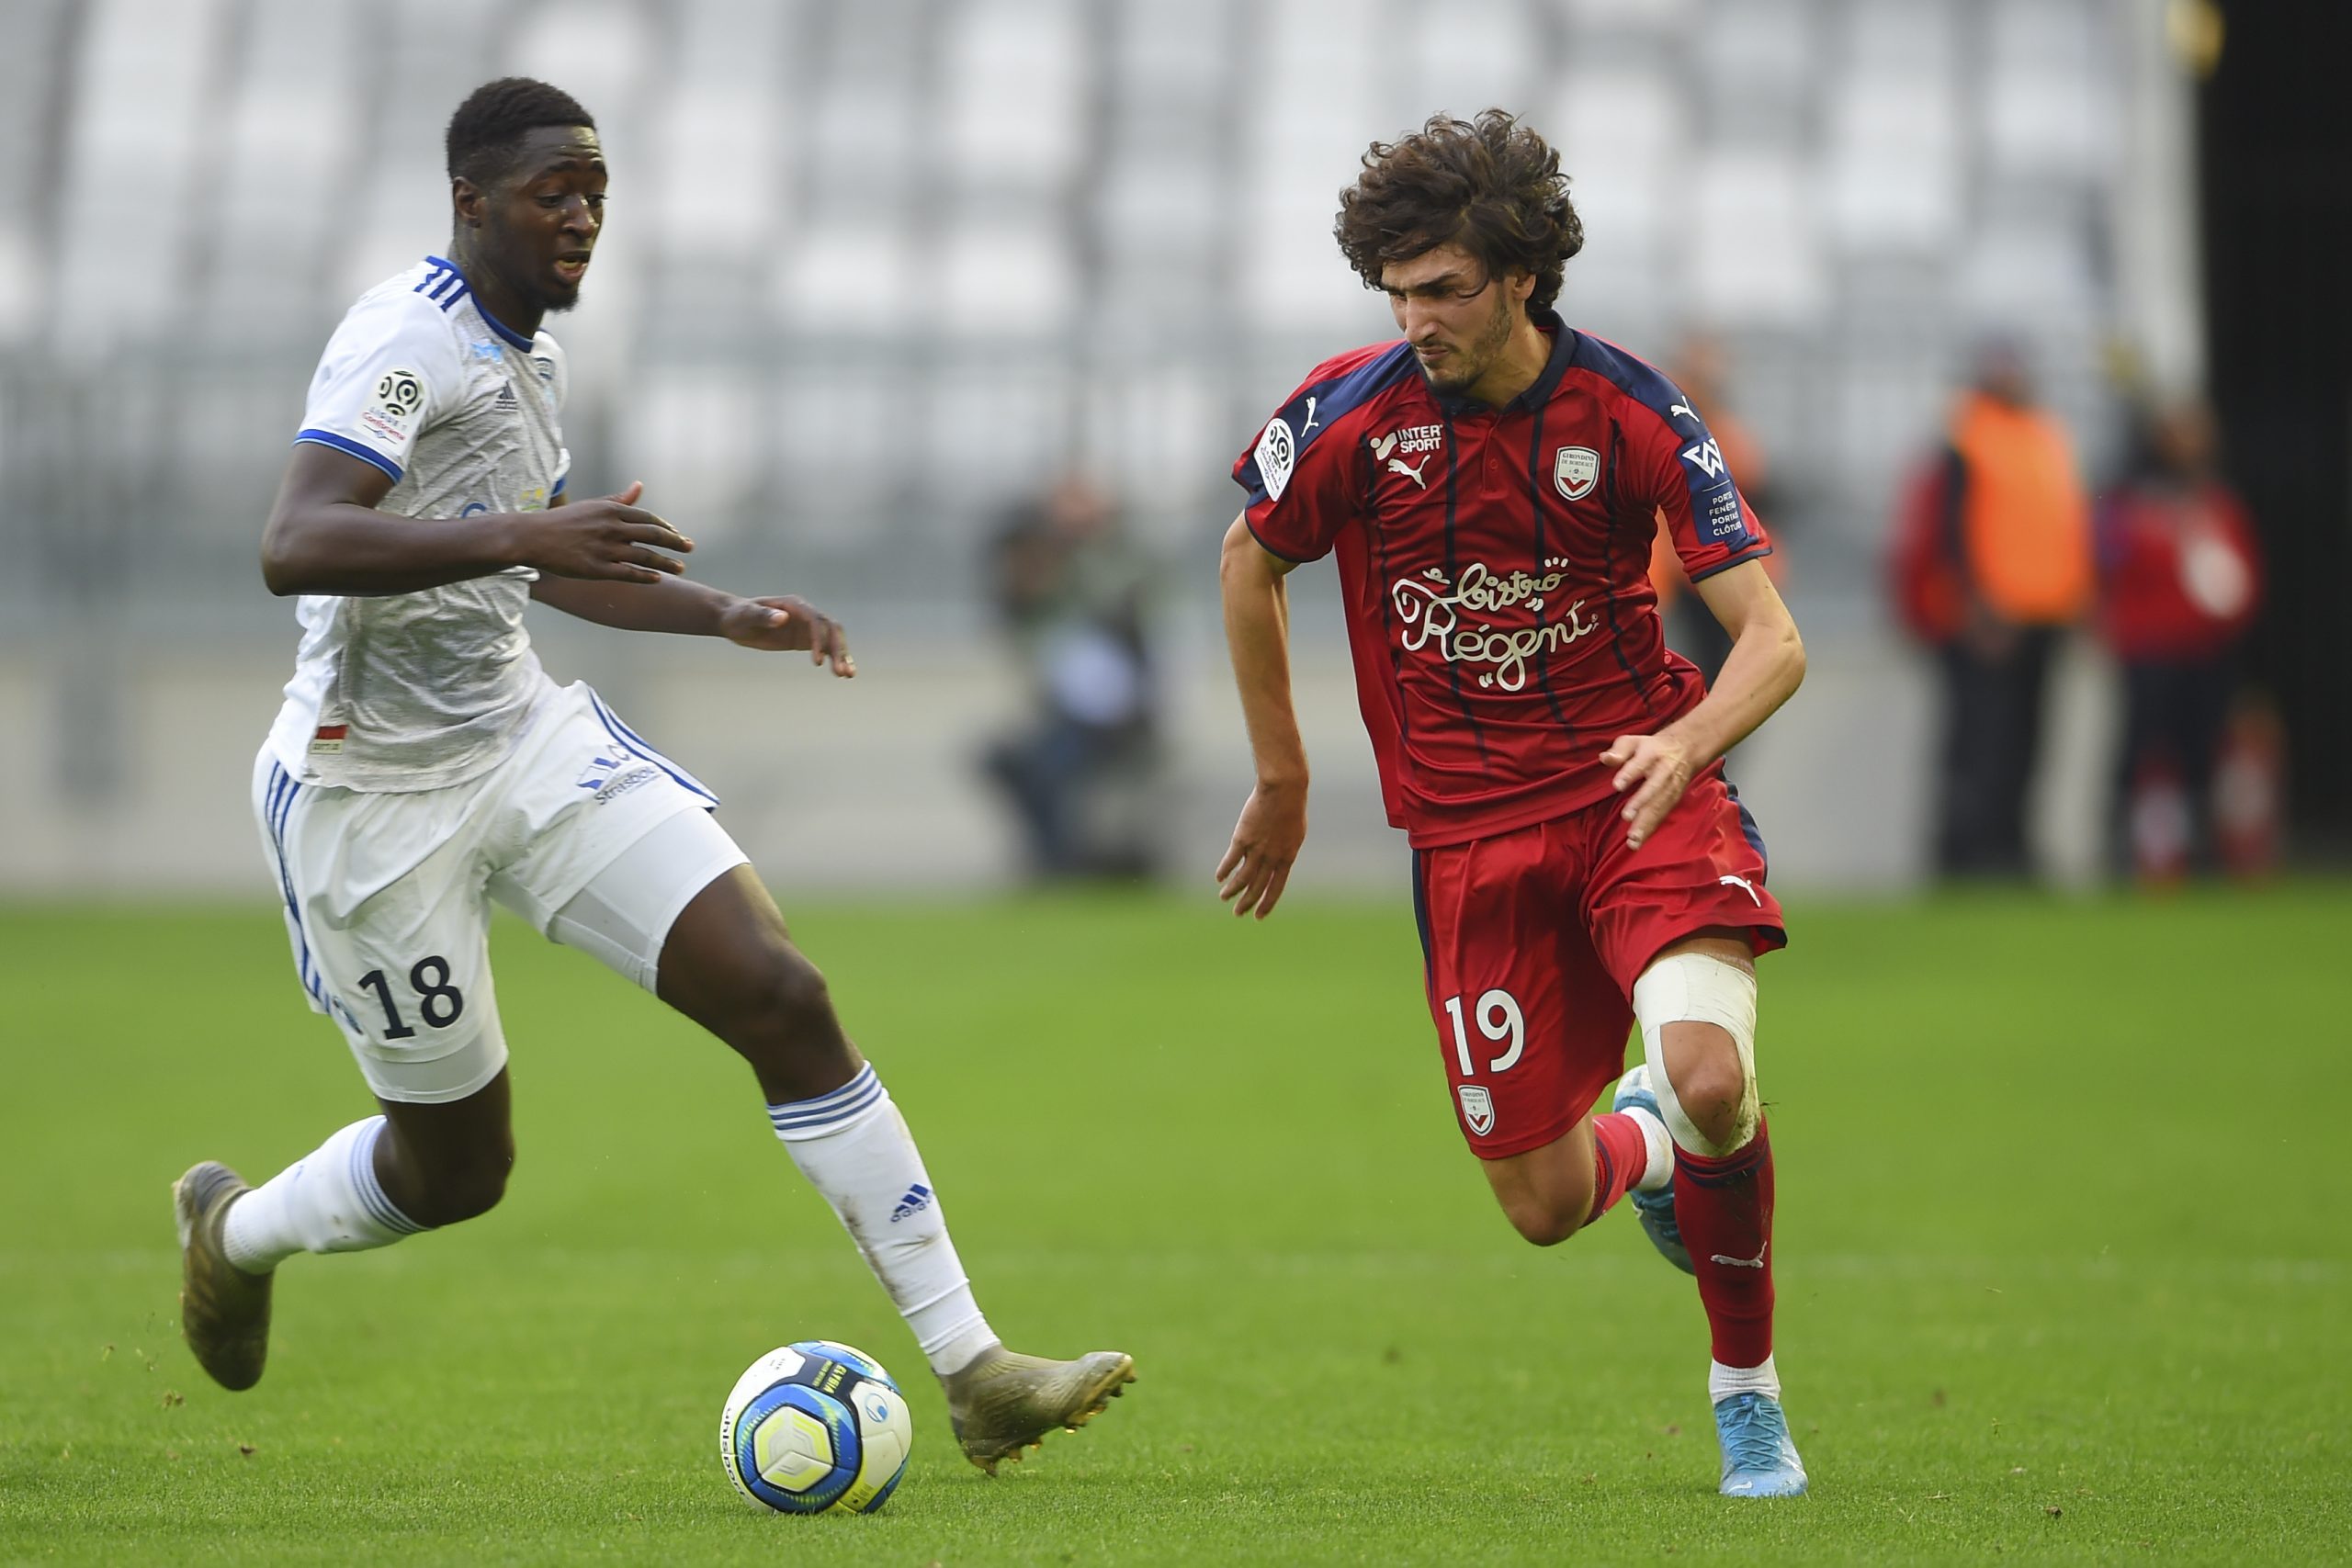 Bordeaux's French midfielder Yacine Adli (right) is challenged by Strasbourg's French midfielder Ibrahima Sissoko (left) during the French Ligue 1 football match between both the sides back in December.